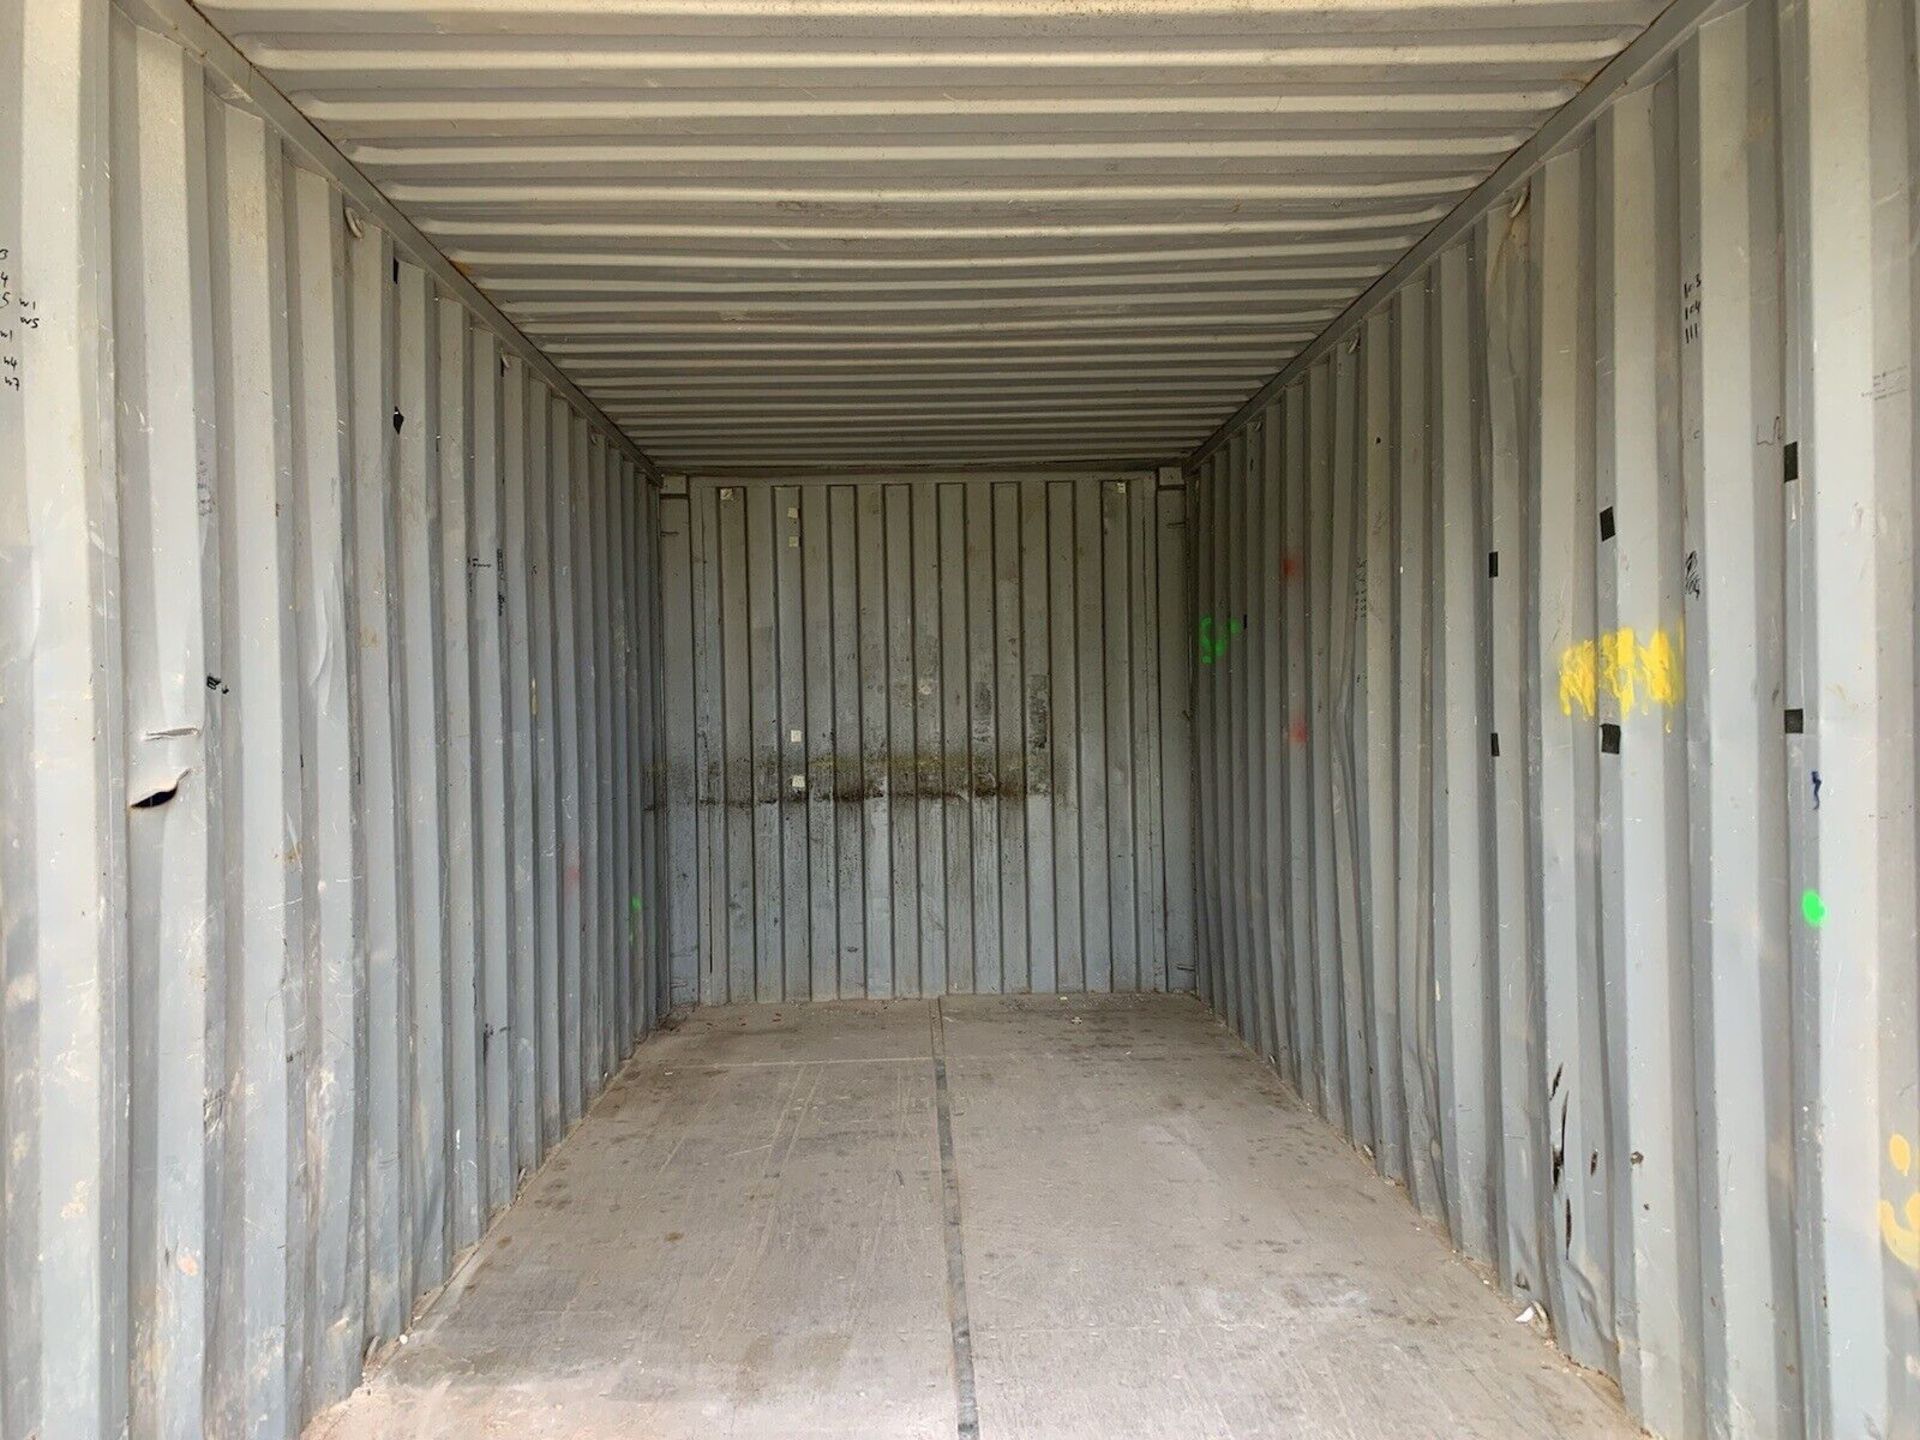 20ft Shipping Container Storage Container Portable Site Store Anti Vandal Steel - Image 6 of 8